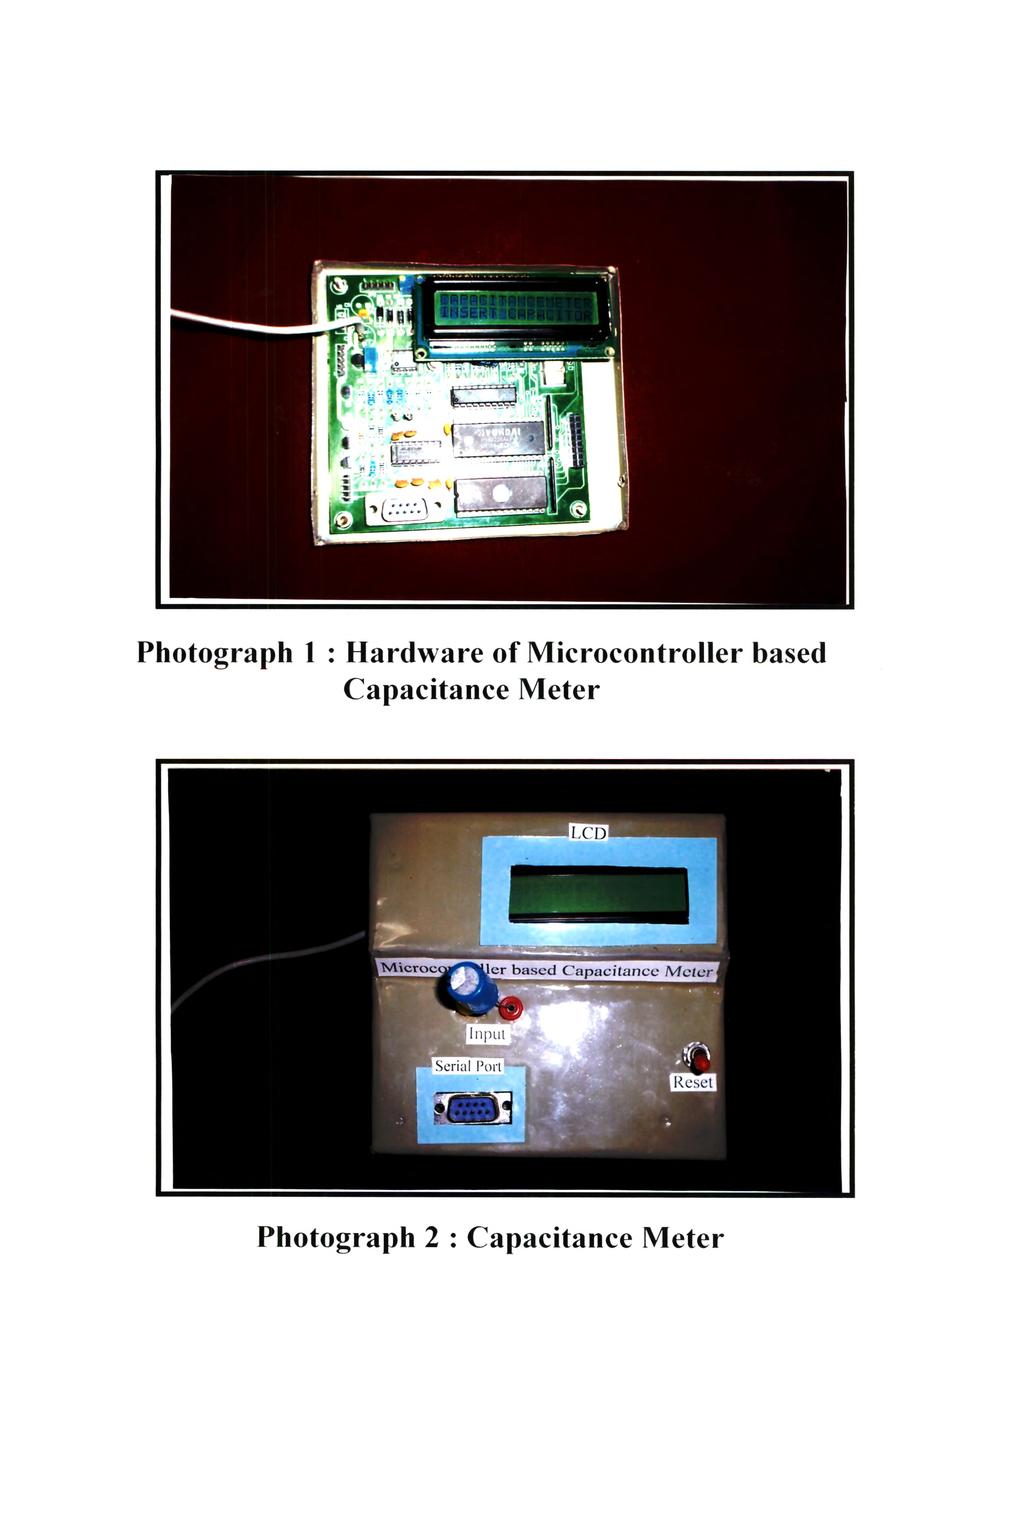 Photograph 1 : Hardware of Microcontroller based